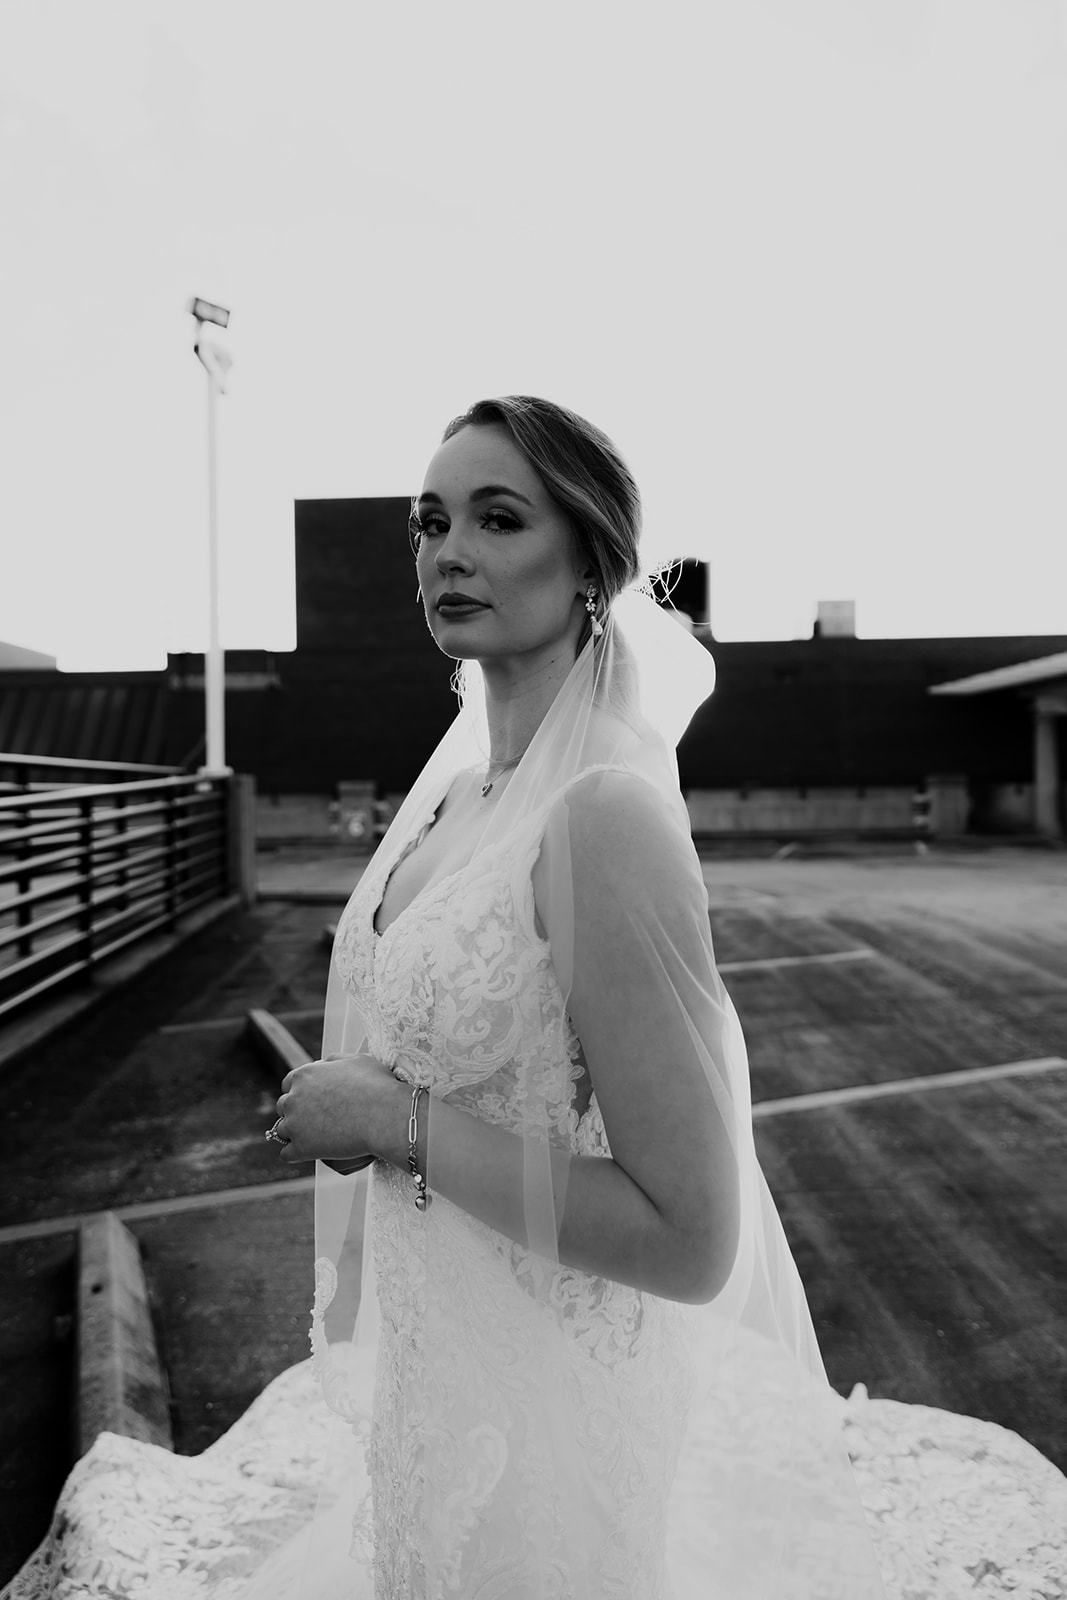 Bride standing on top of parking garage looking into camera. Edgy bridal photo vibe.